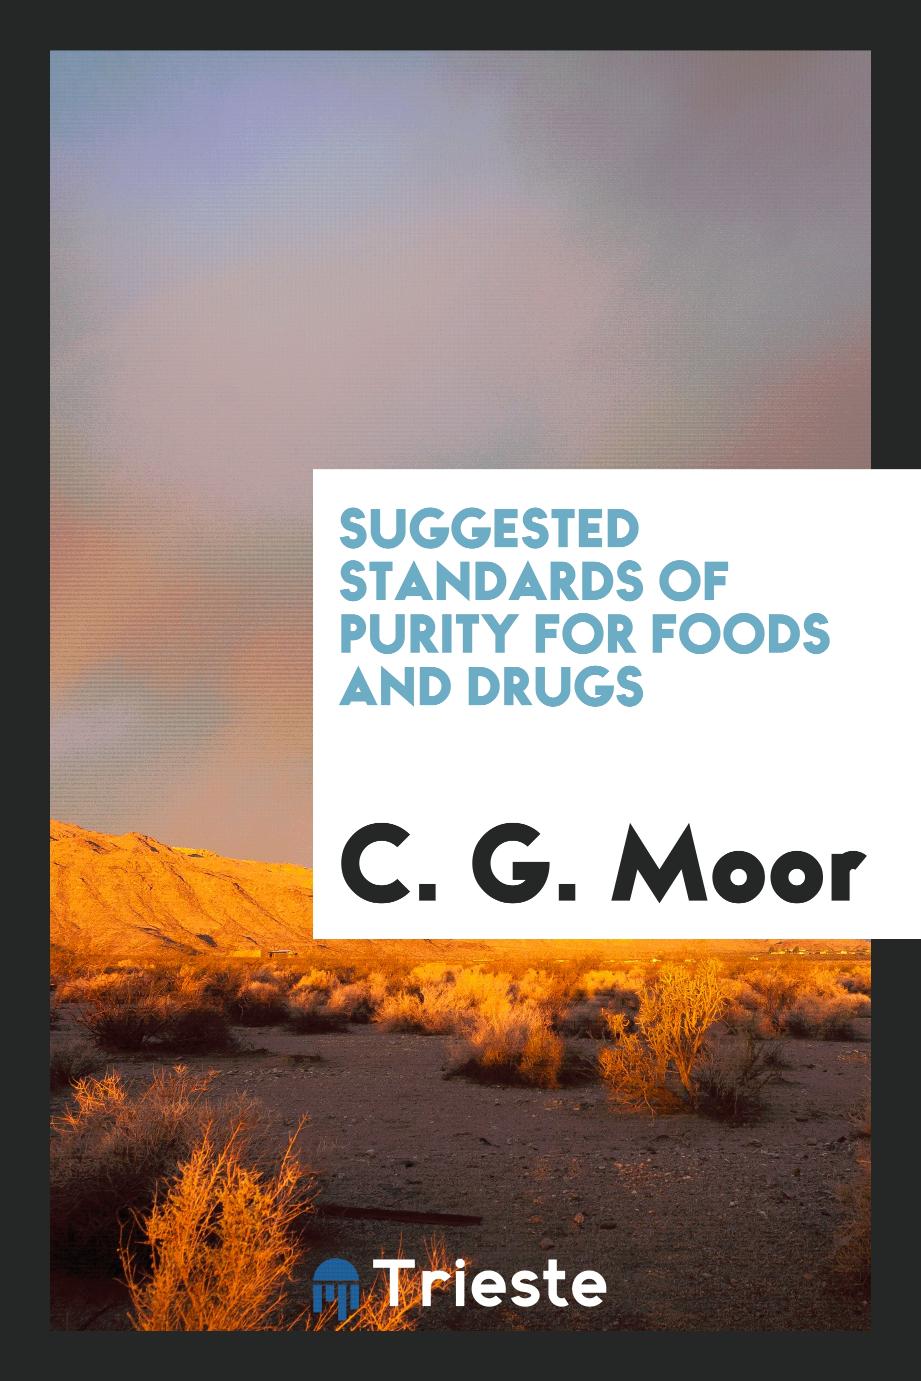 Suggested standards of purity for foods and drugs